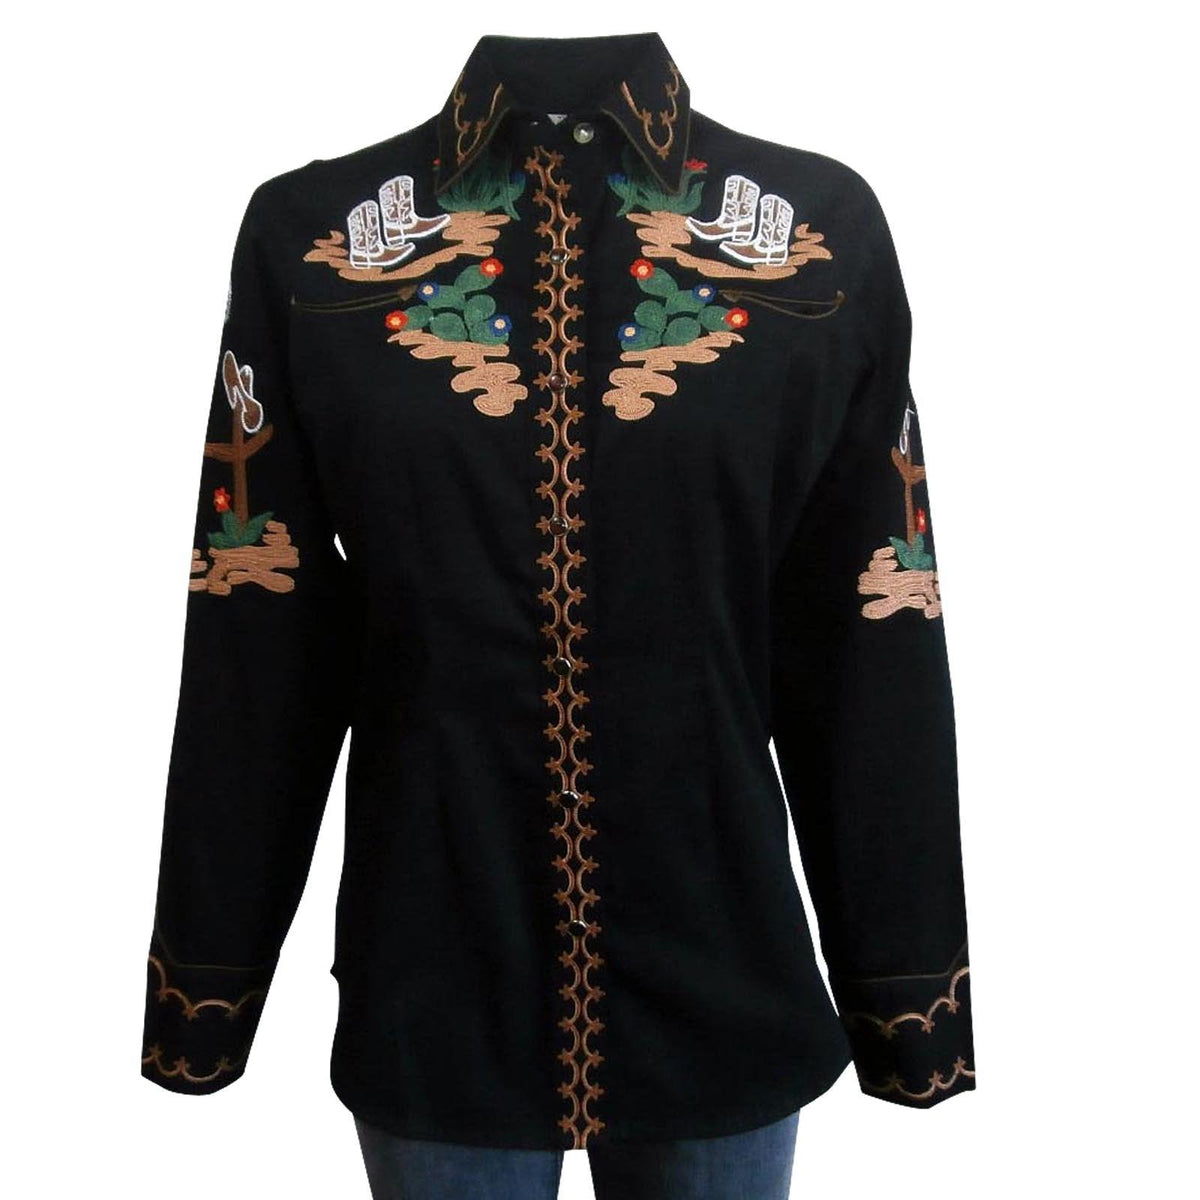 Women's Vintage Cactus & Cowgirl Boots Embroidered Western Shirt in Black - Flyclothing LLC